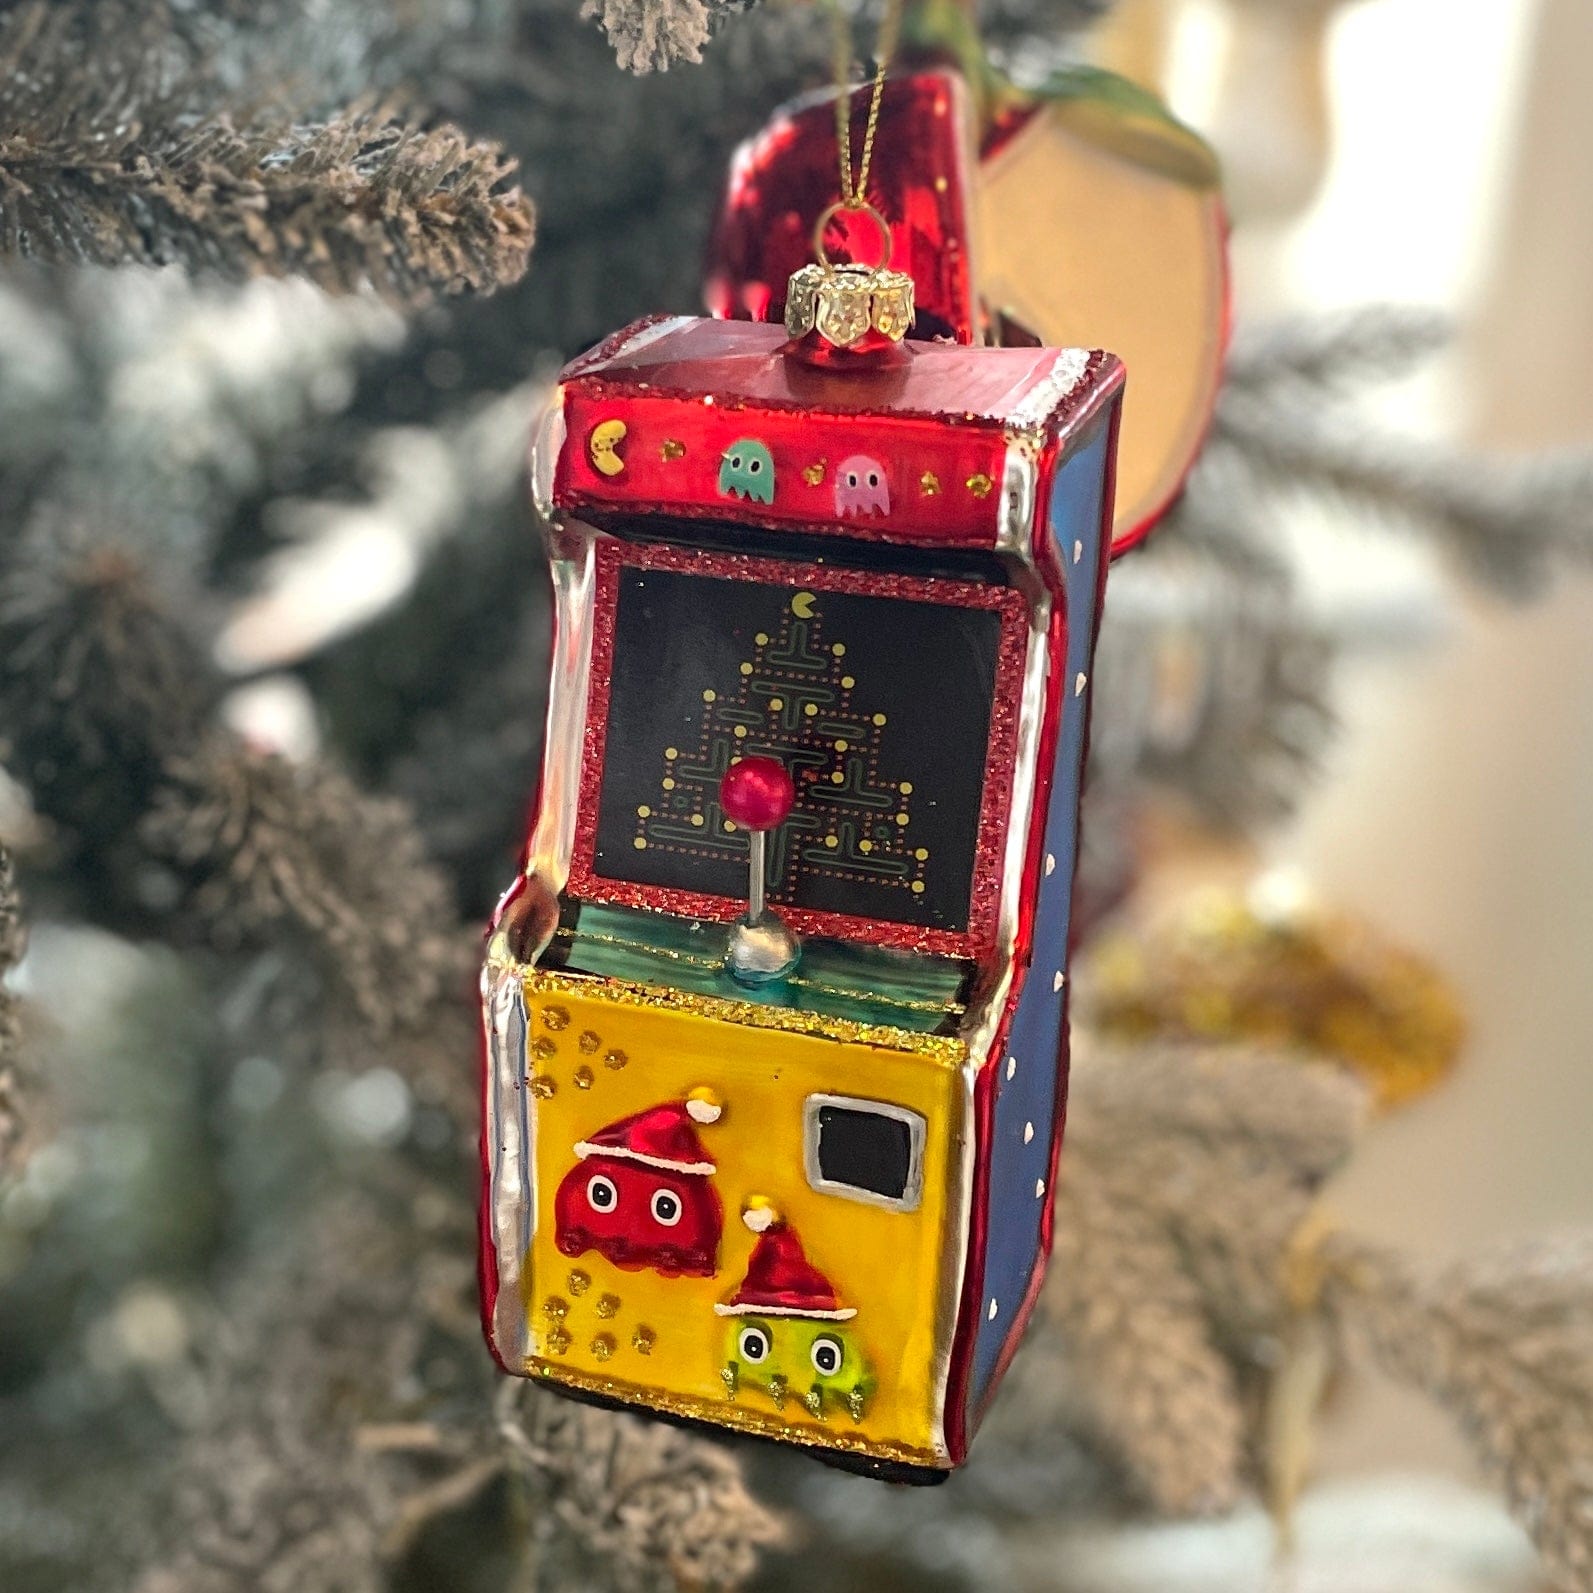 Vintage Arcade Game Vintage-Style Glass Holiday Ornament - PORCH